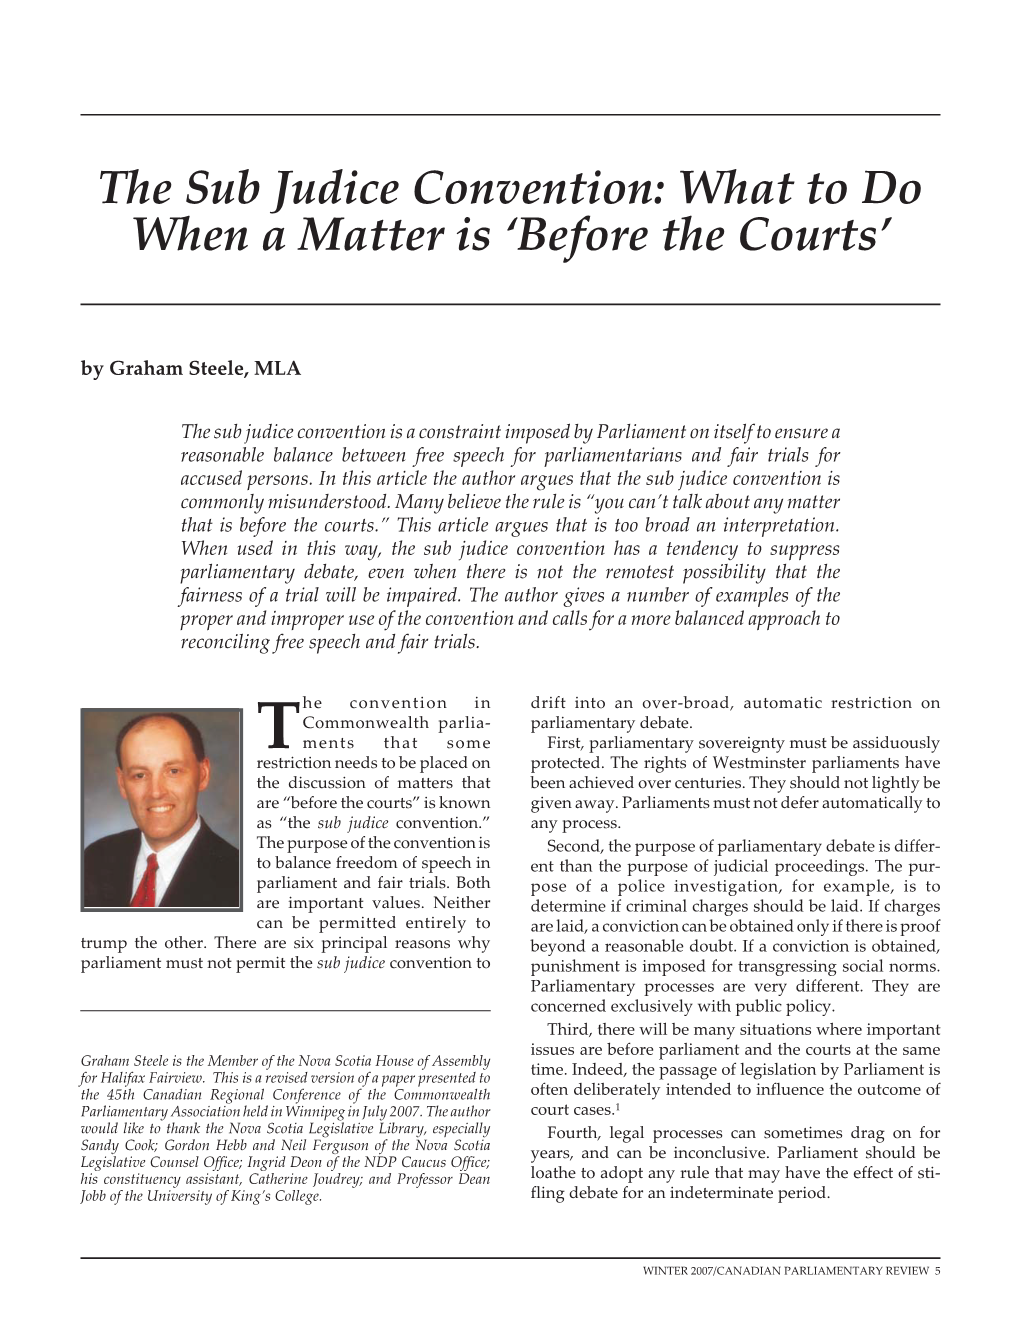 The Sub Judice Convention: What to Do When a Matter Is 'Before the Courts'